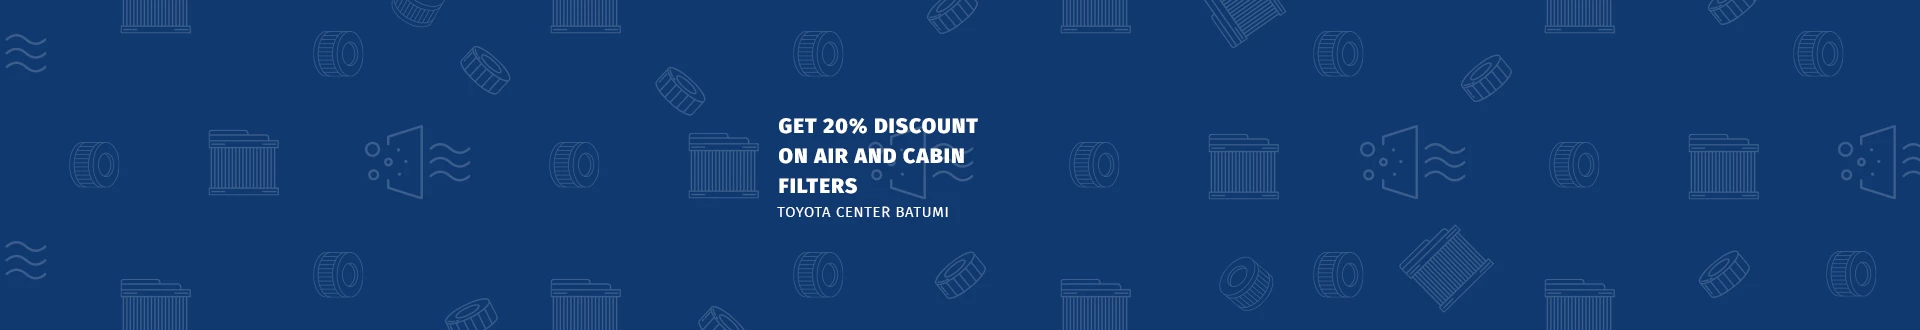 Offer Cover Image Toyota Center Batumi offers